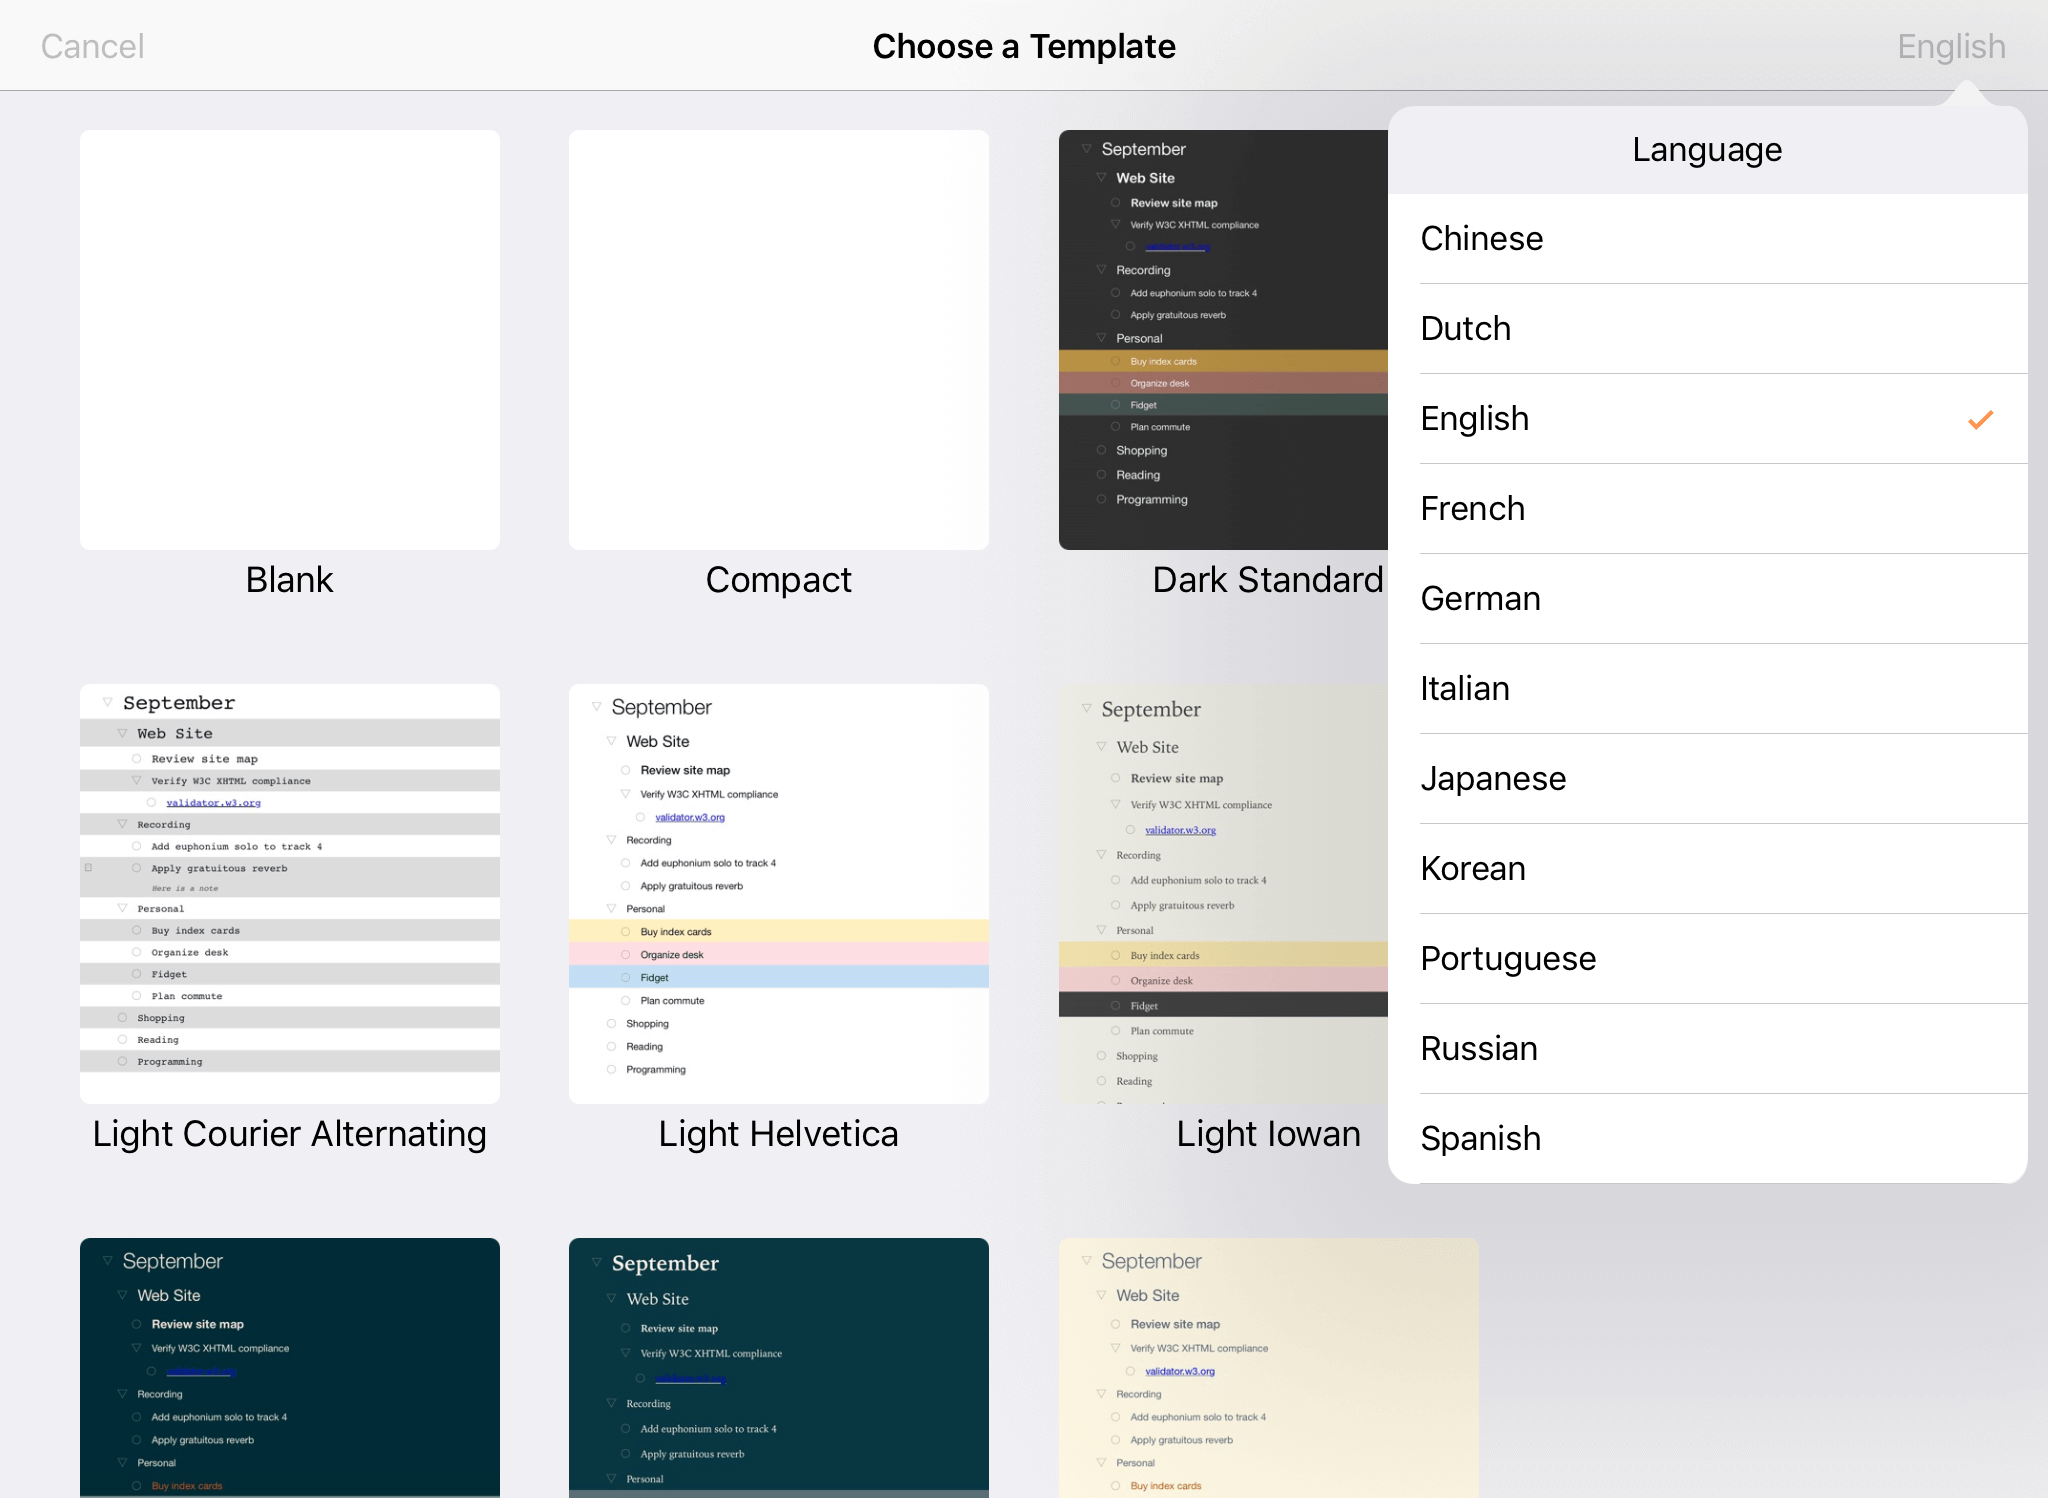 The template chooser when creating a new document in OmniOutliner.